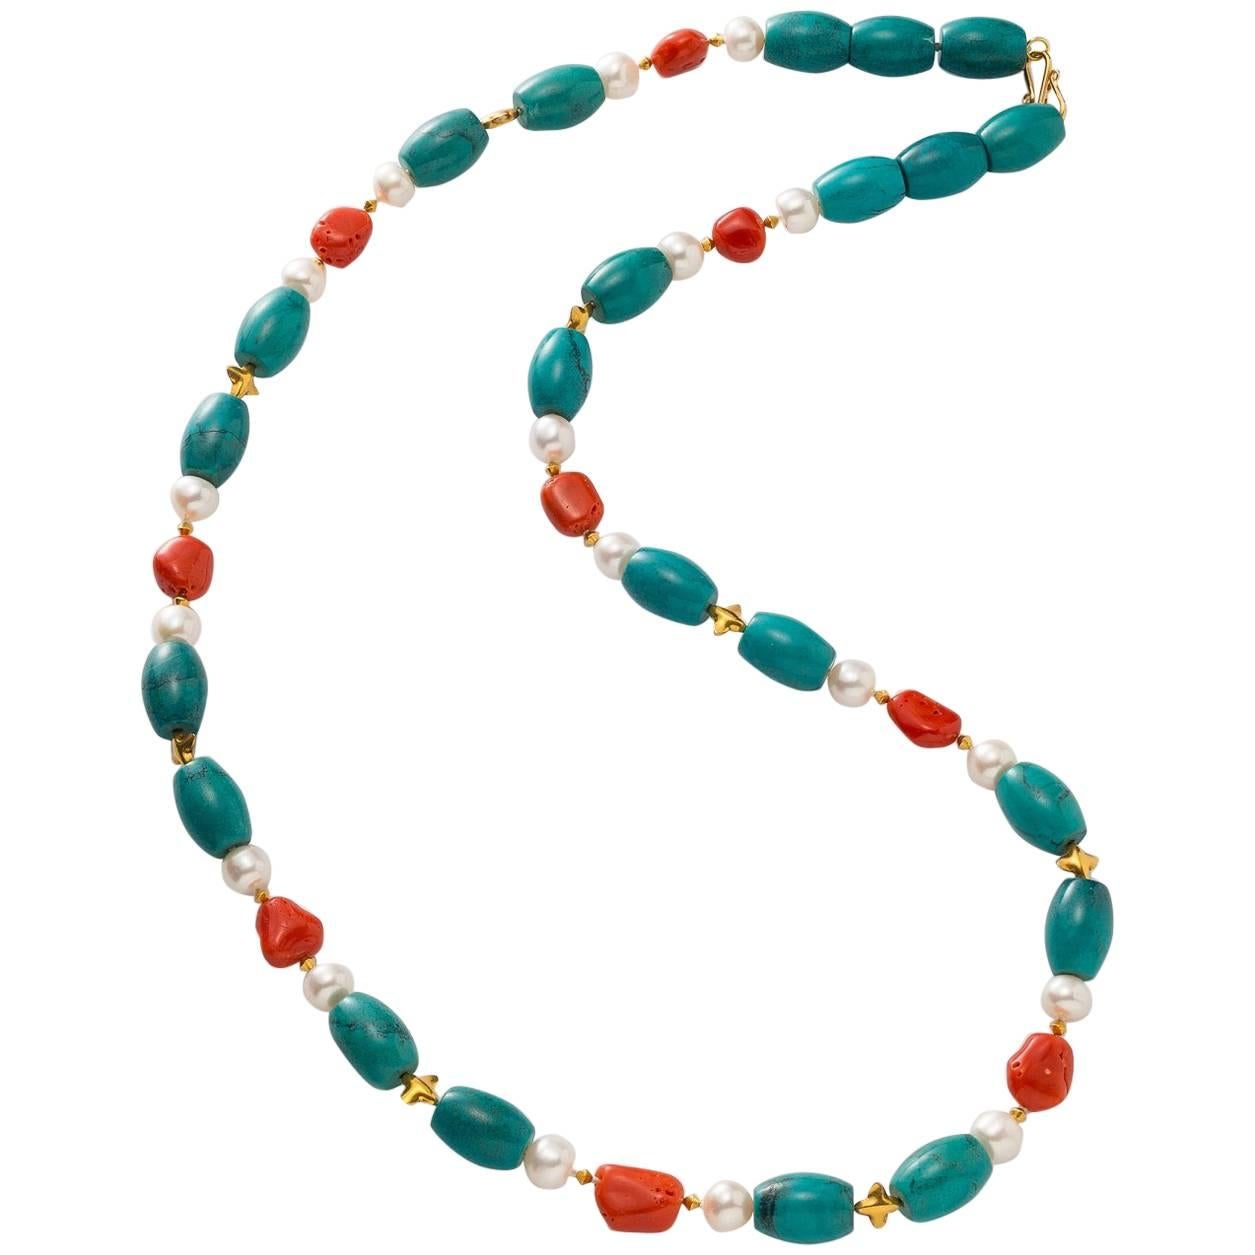 Necklace with Turquoise, Coral Pebbles, Freshwater Pearls & 18K Gold 